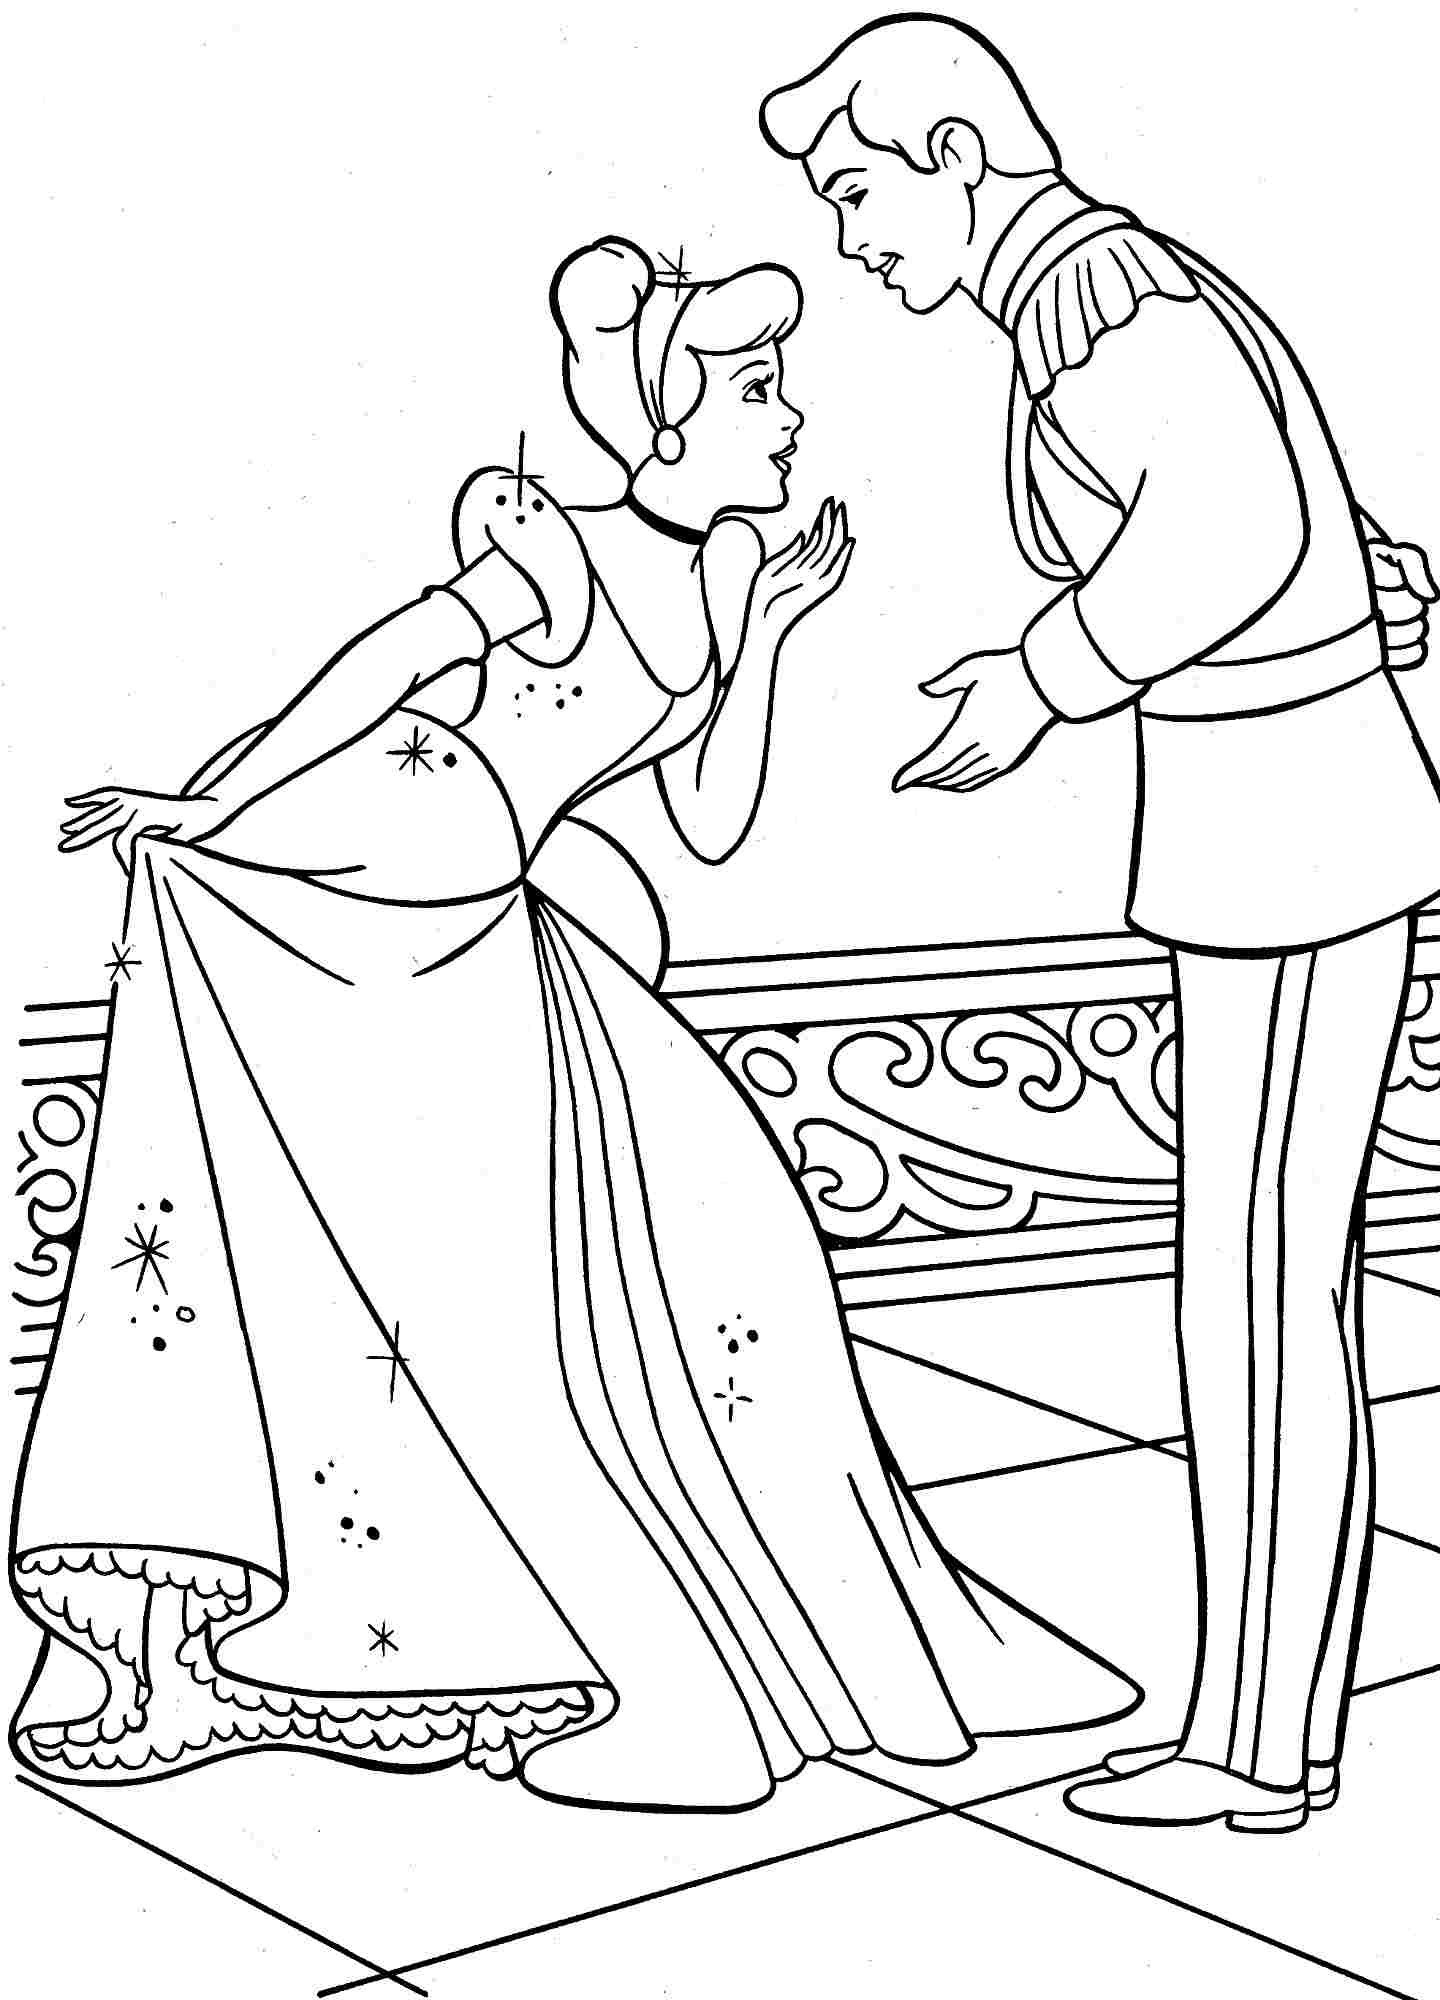 Coloring Pages Disney Cinderella Best Cinderella Coloring Pages New Best Cinderella Carriage Coloring Page Activity